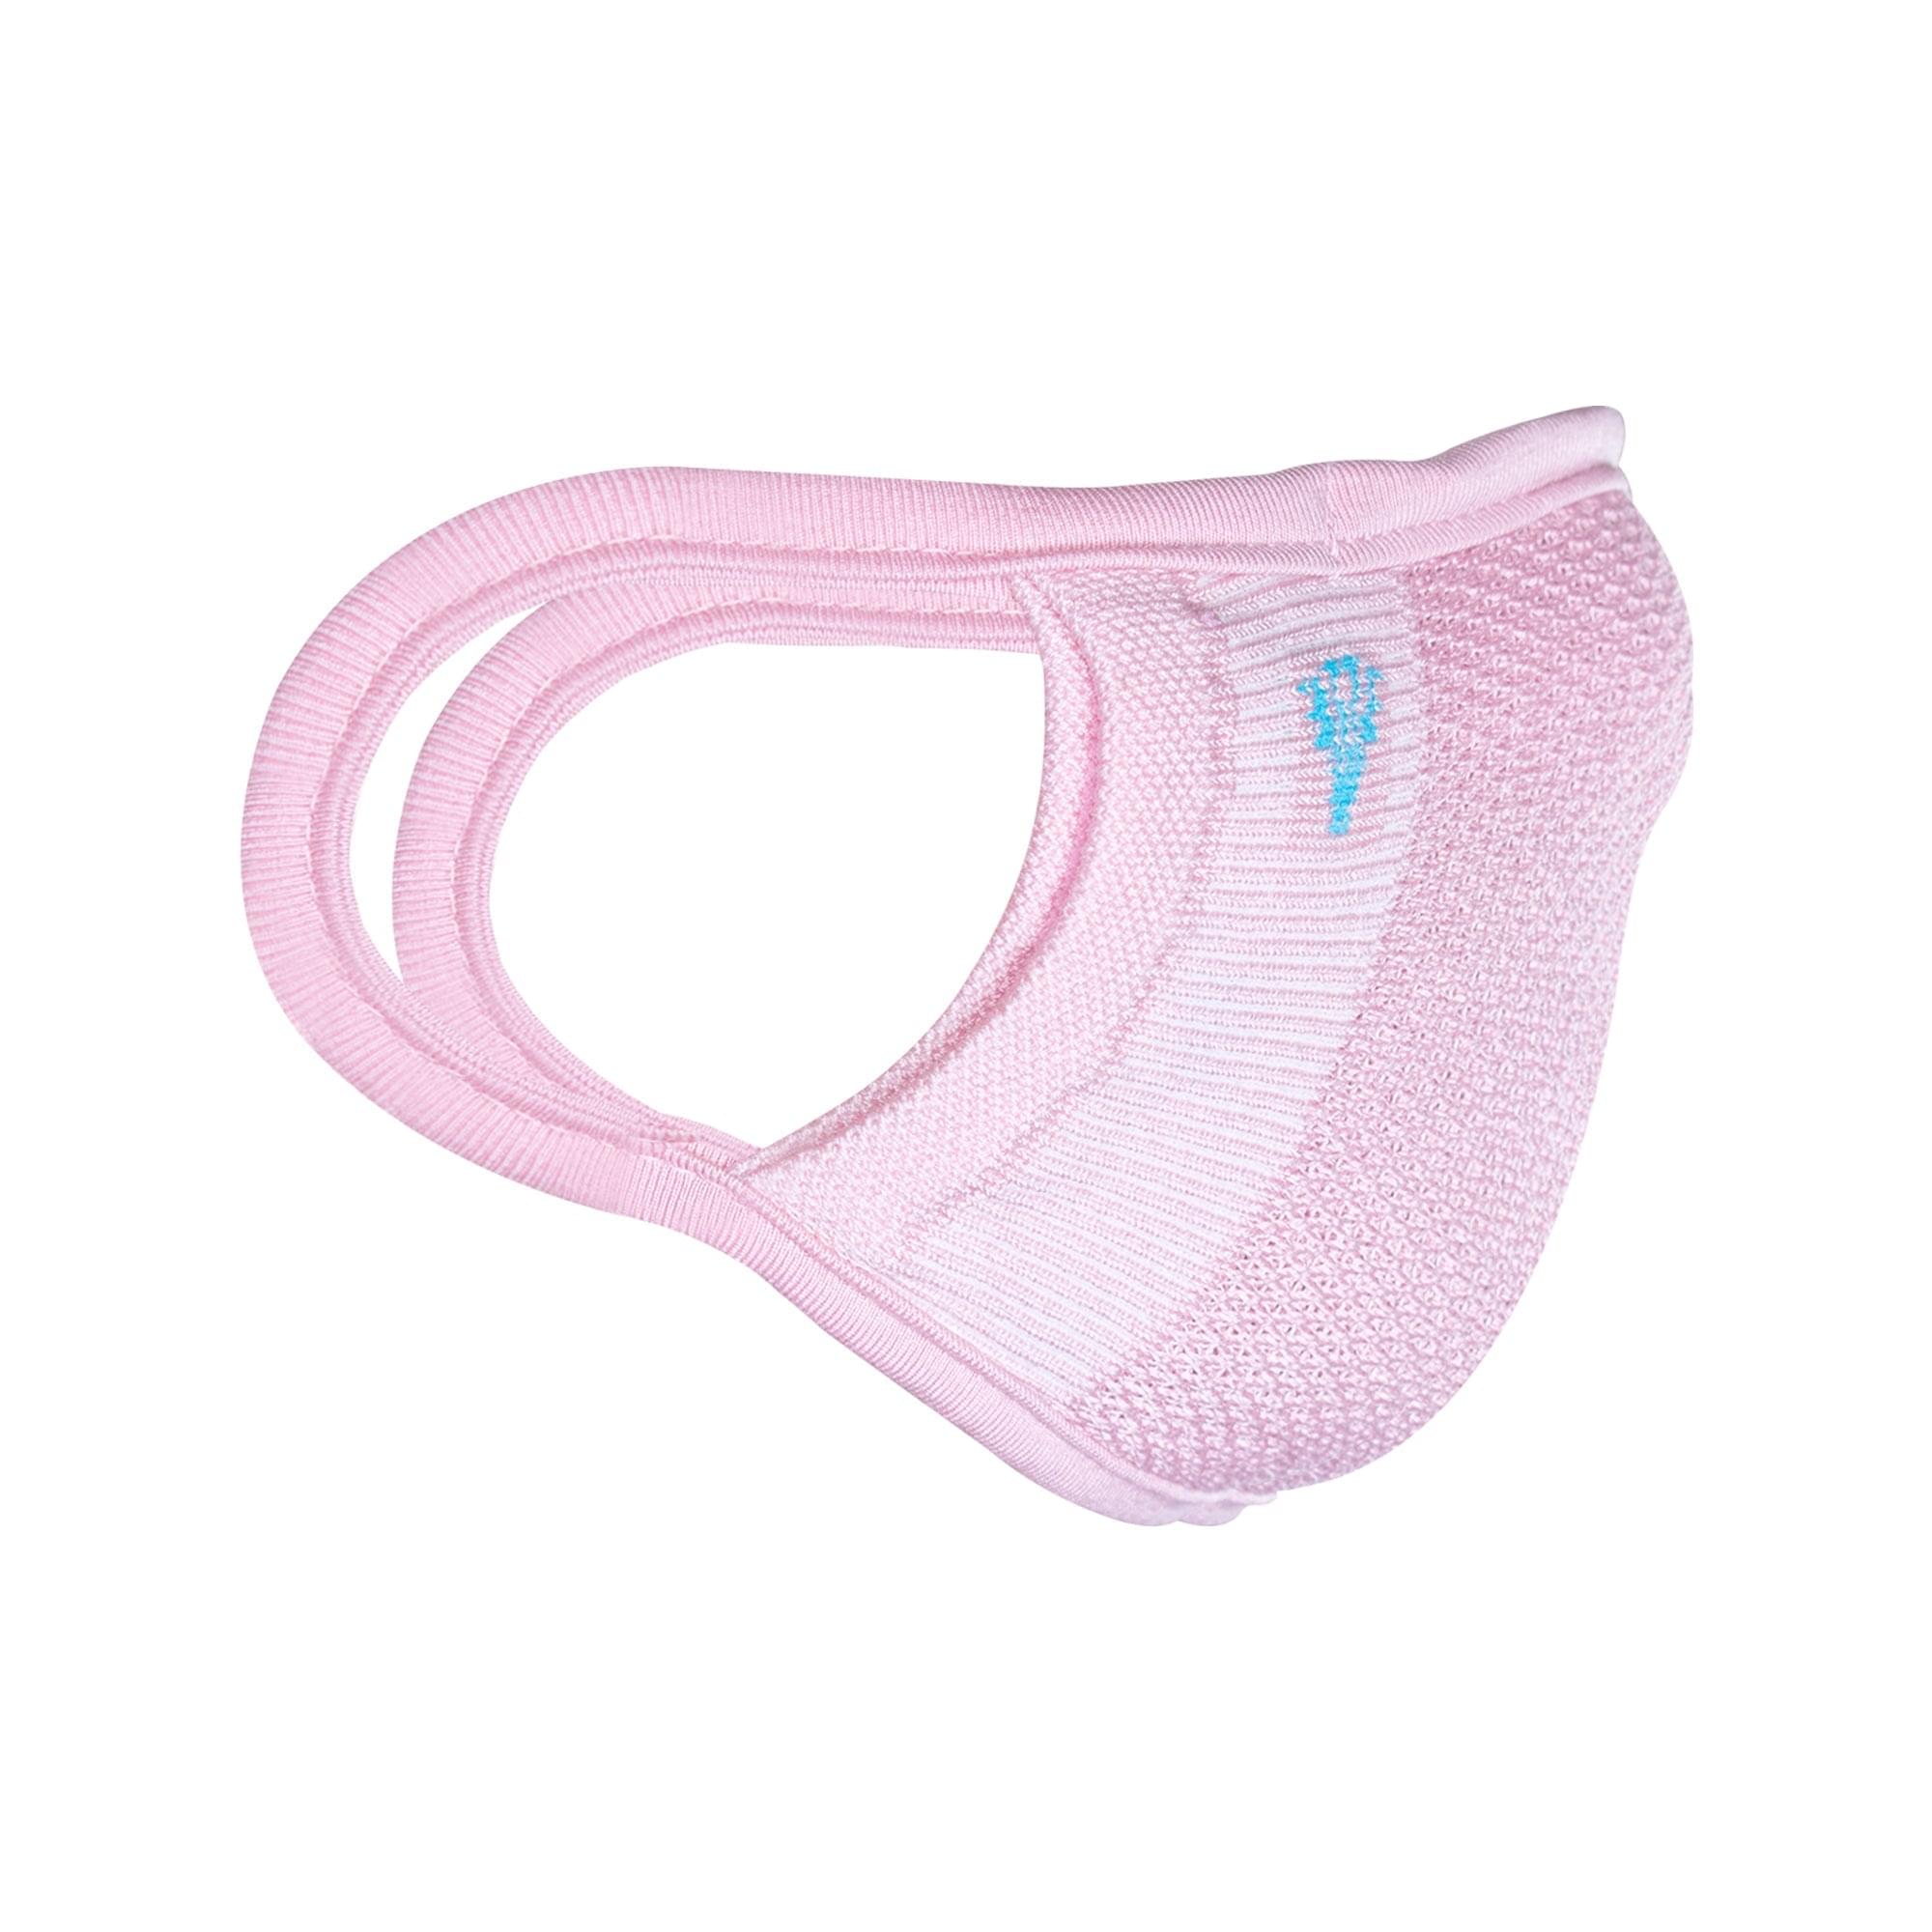 2-Layer Anti-Bacterial Protection Mask for Kids, Fashion Coloured -Size - Small (3-7 Yrs) - Pack of 2